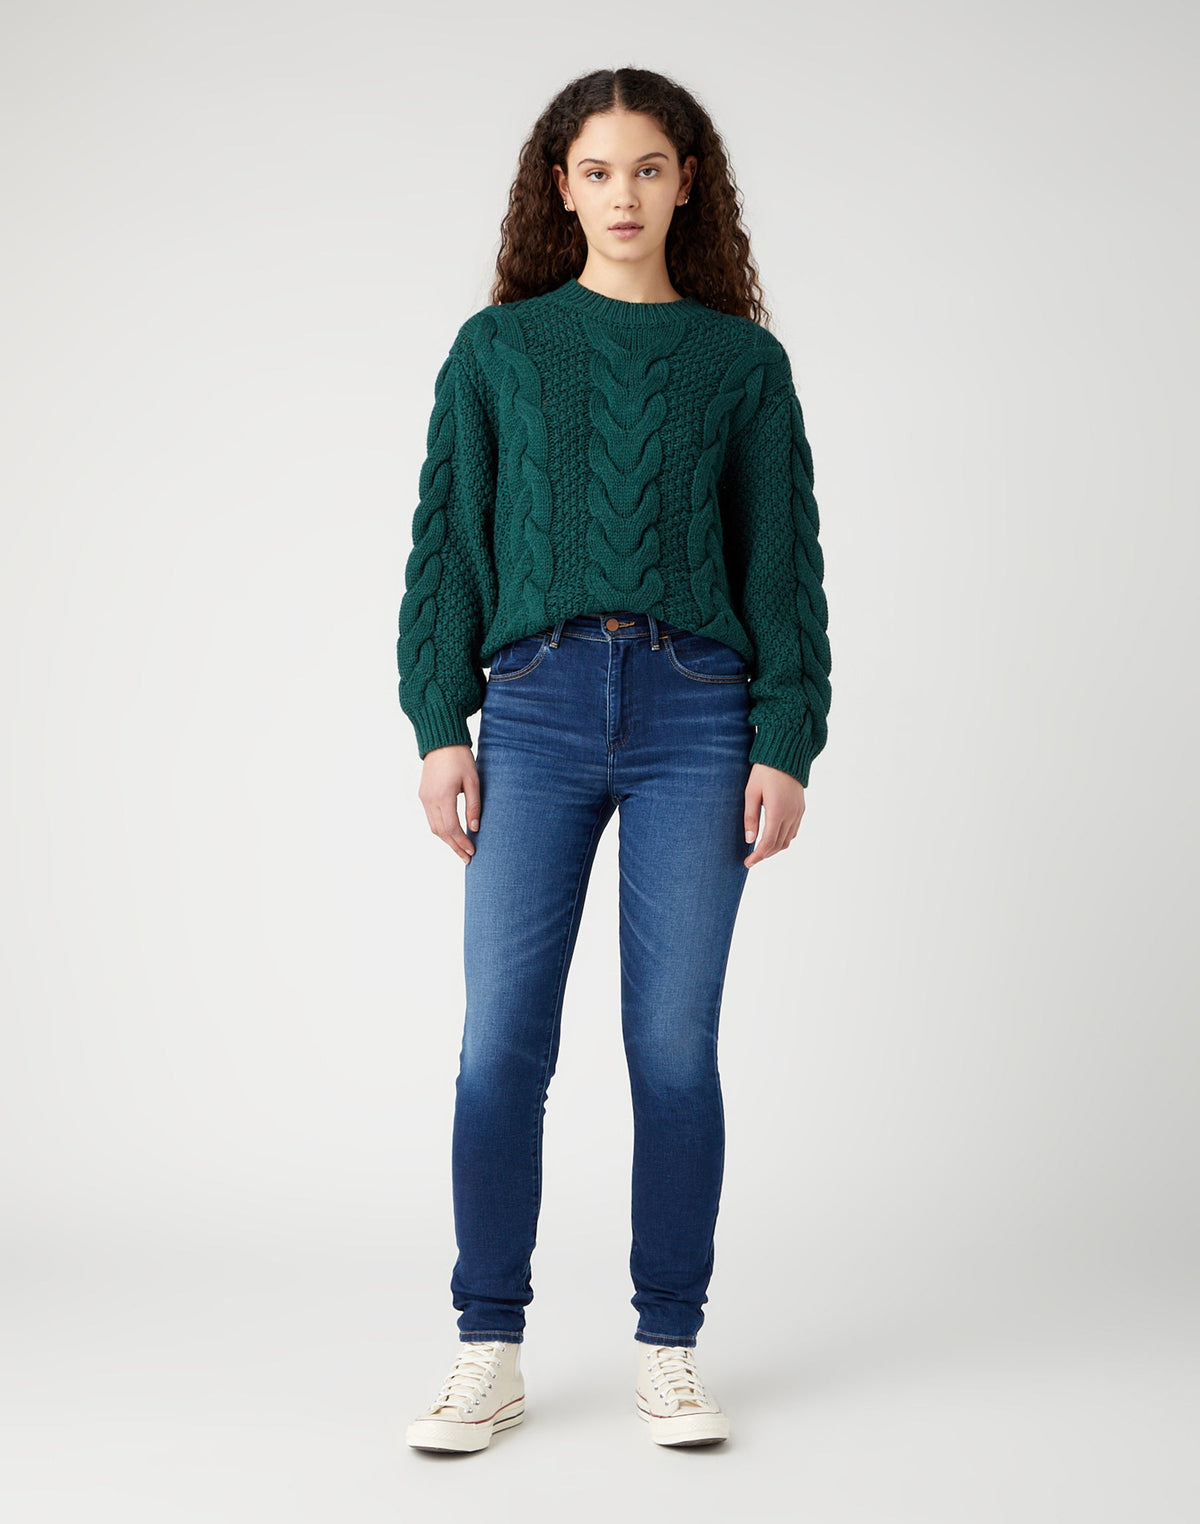 Crew Neck Cable Knit in Dark Matcha